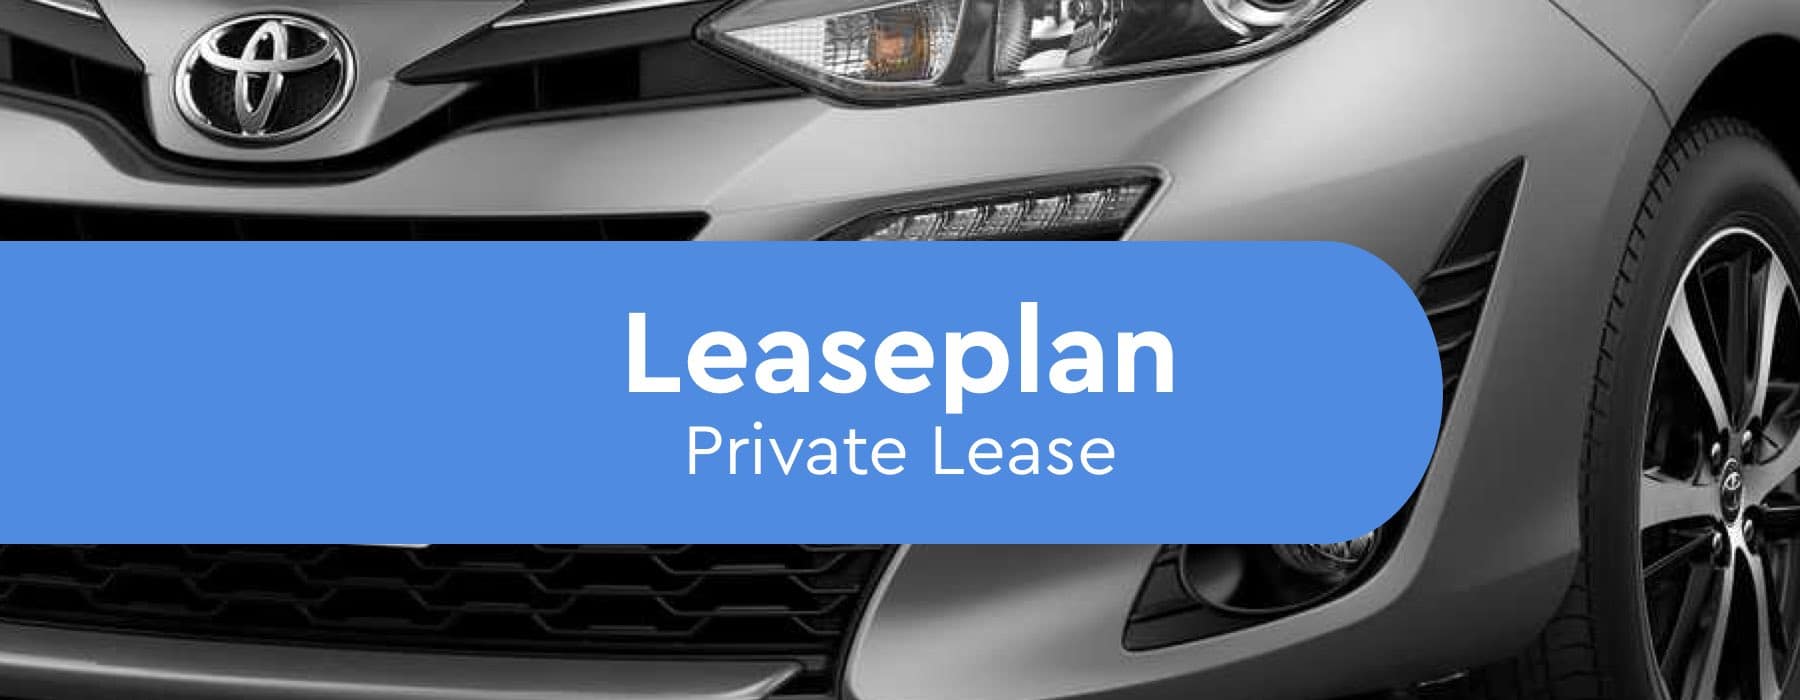 Leaseplan Private Lease